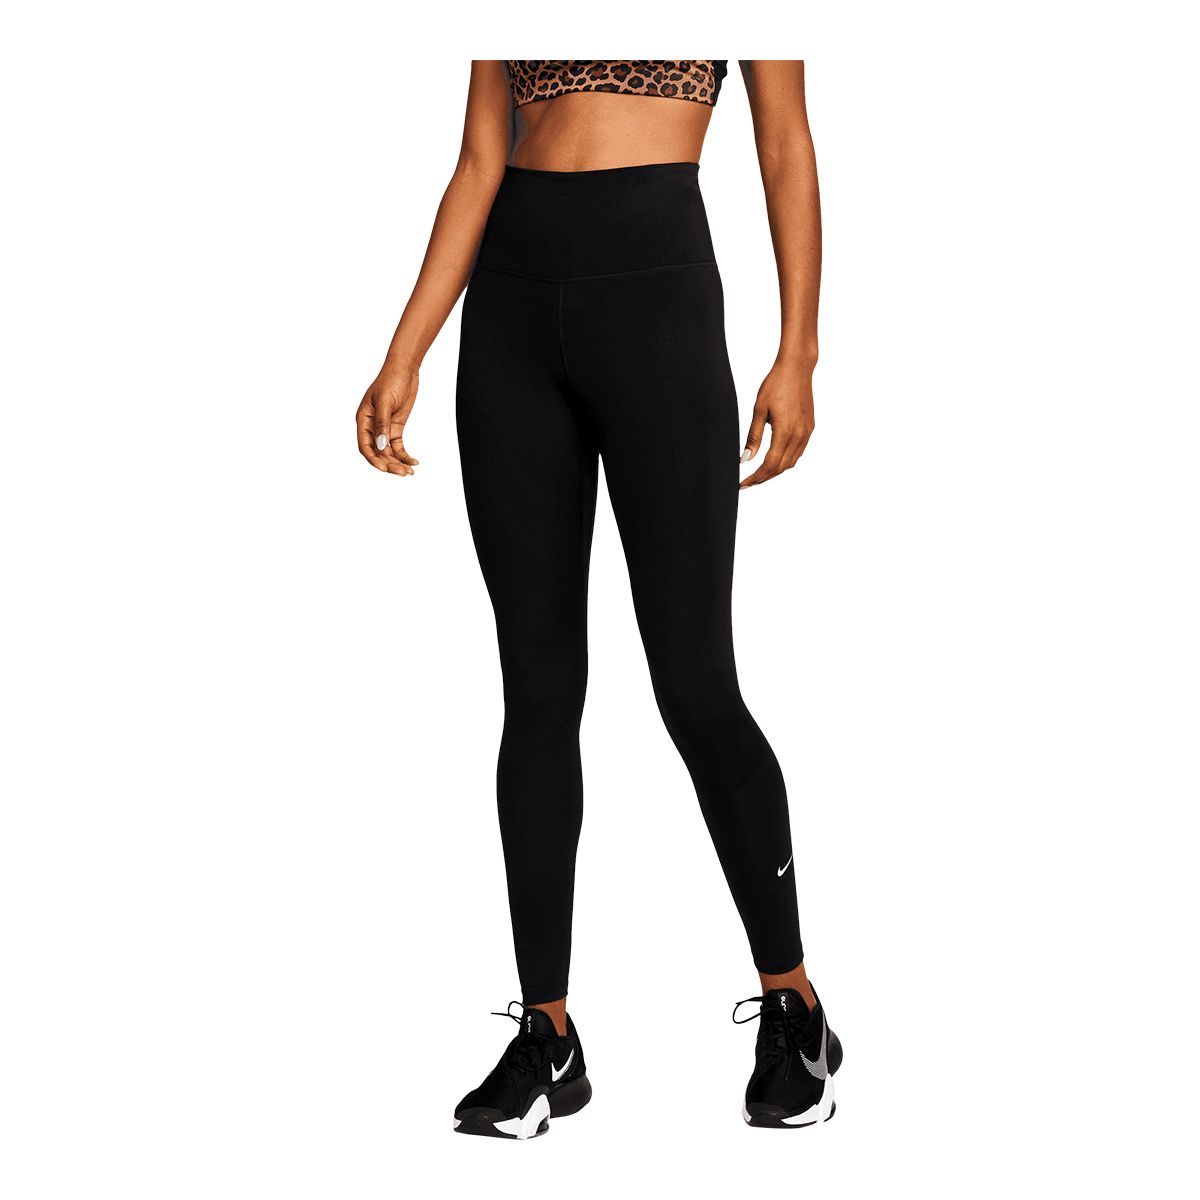 Nike dri-fit Leggings With Tie Front And Ankle Zipper Black Size XS - $16 -  From Happy